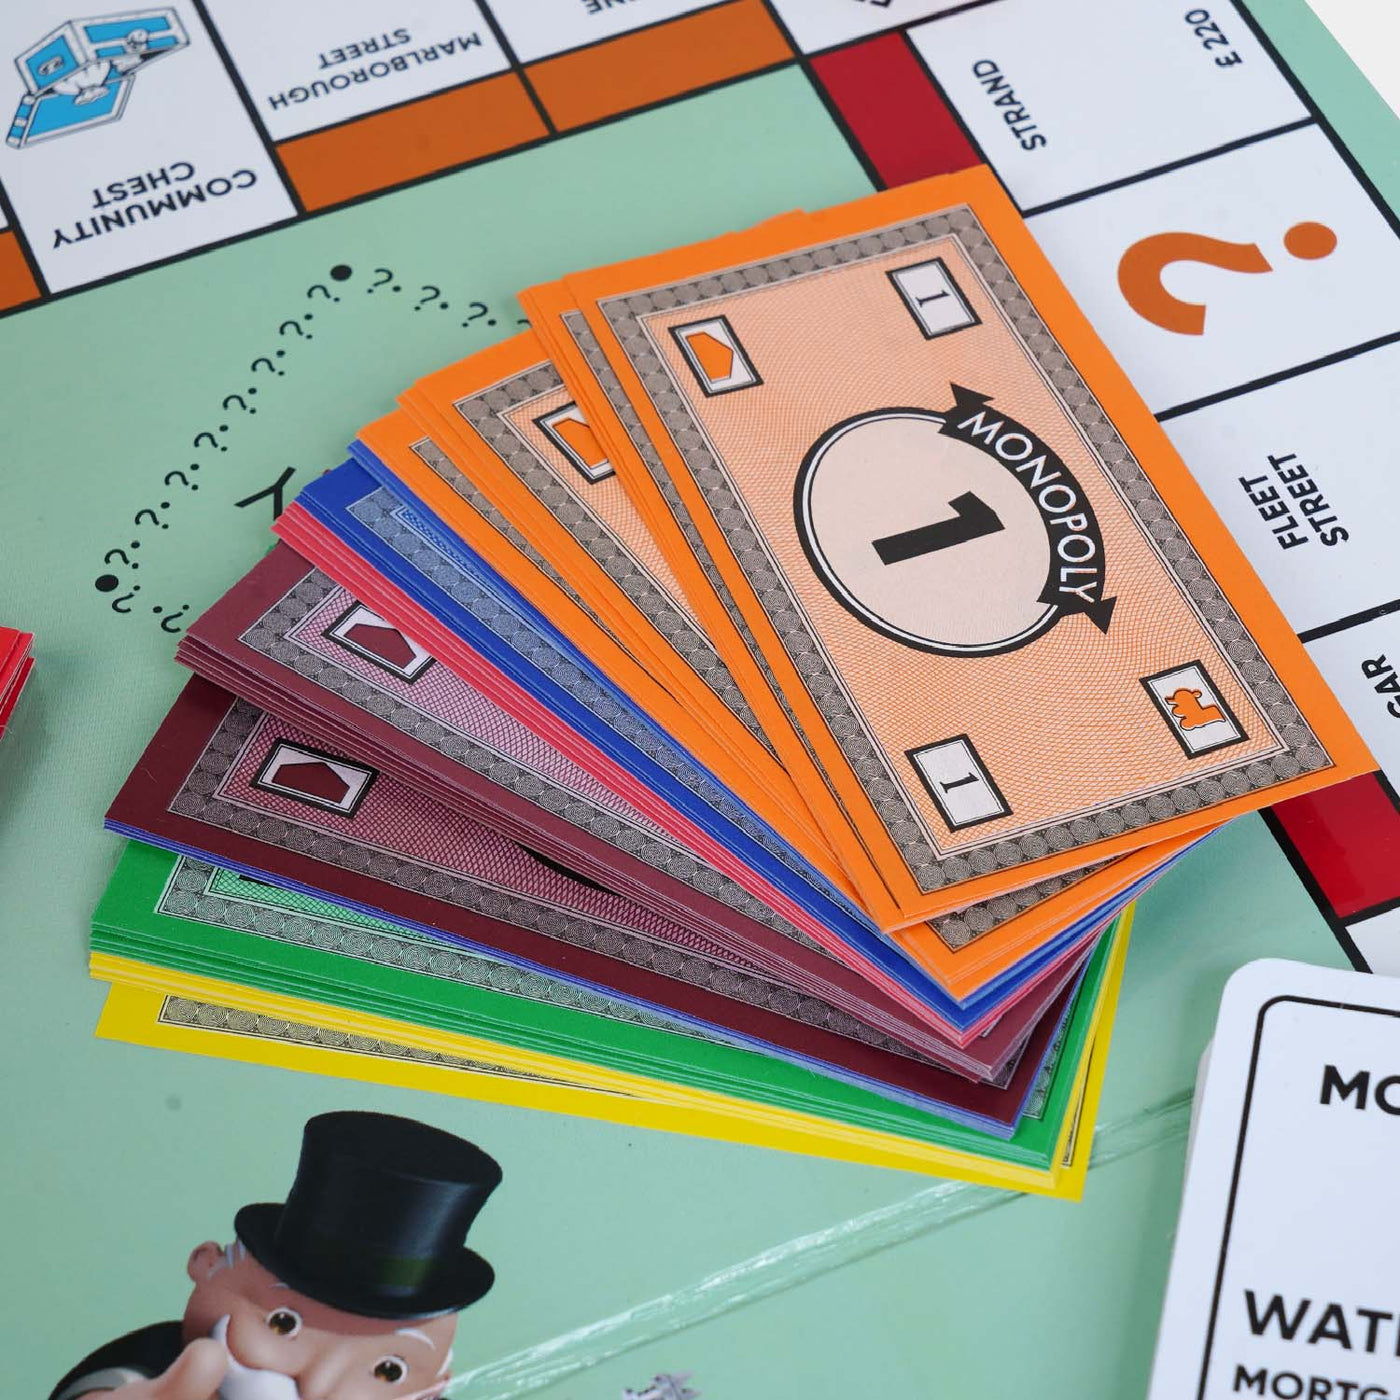 2-in-1 Monopoly and Ludo Board Game